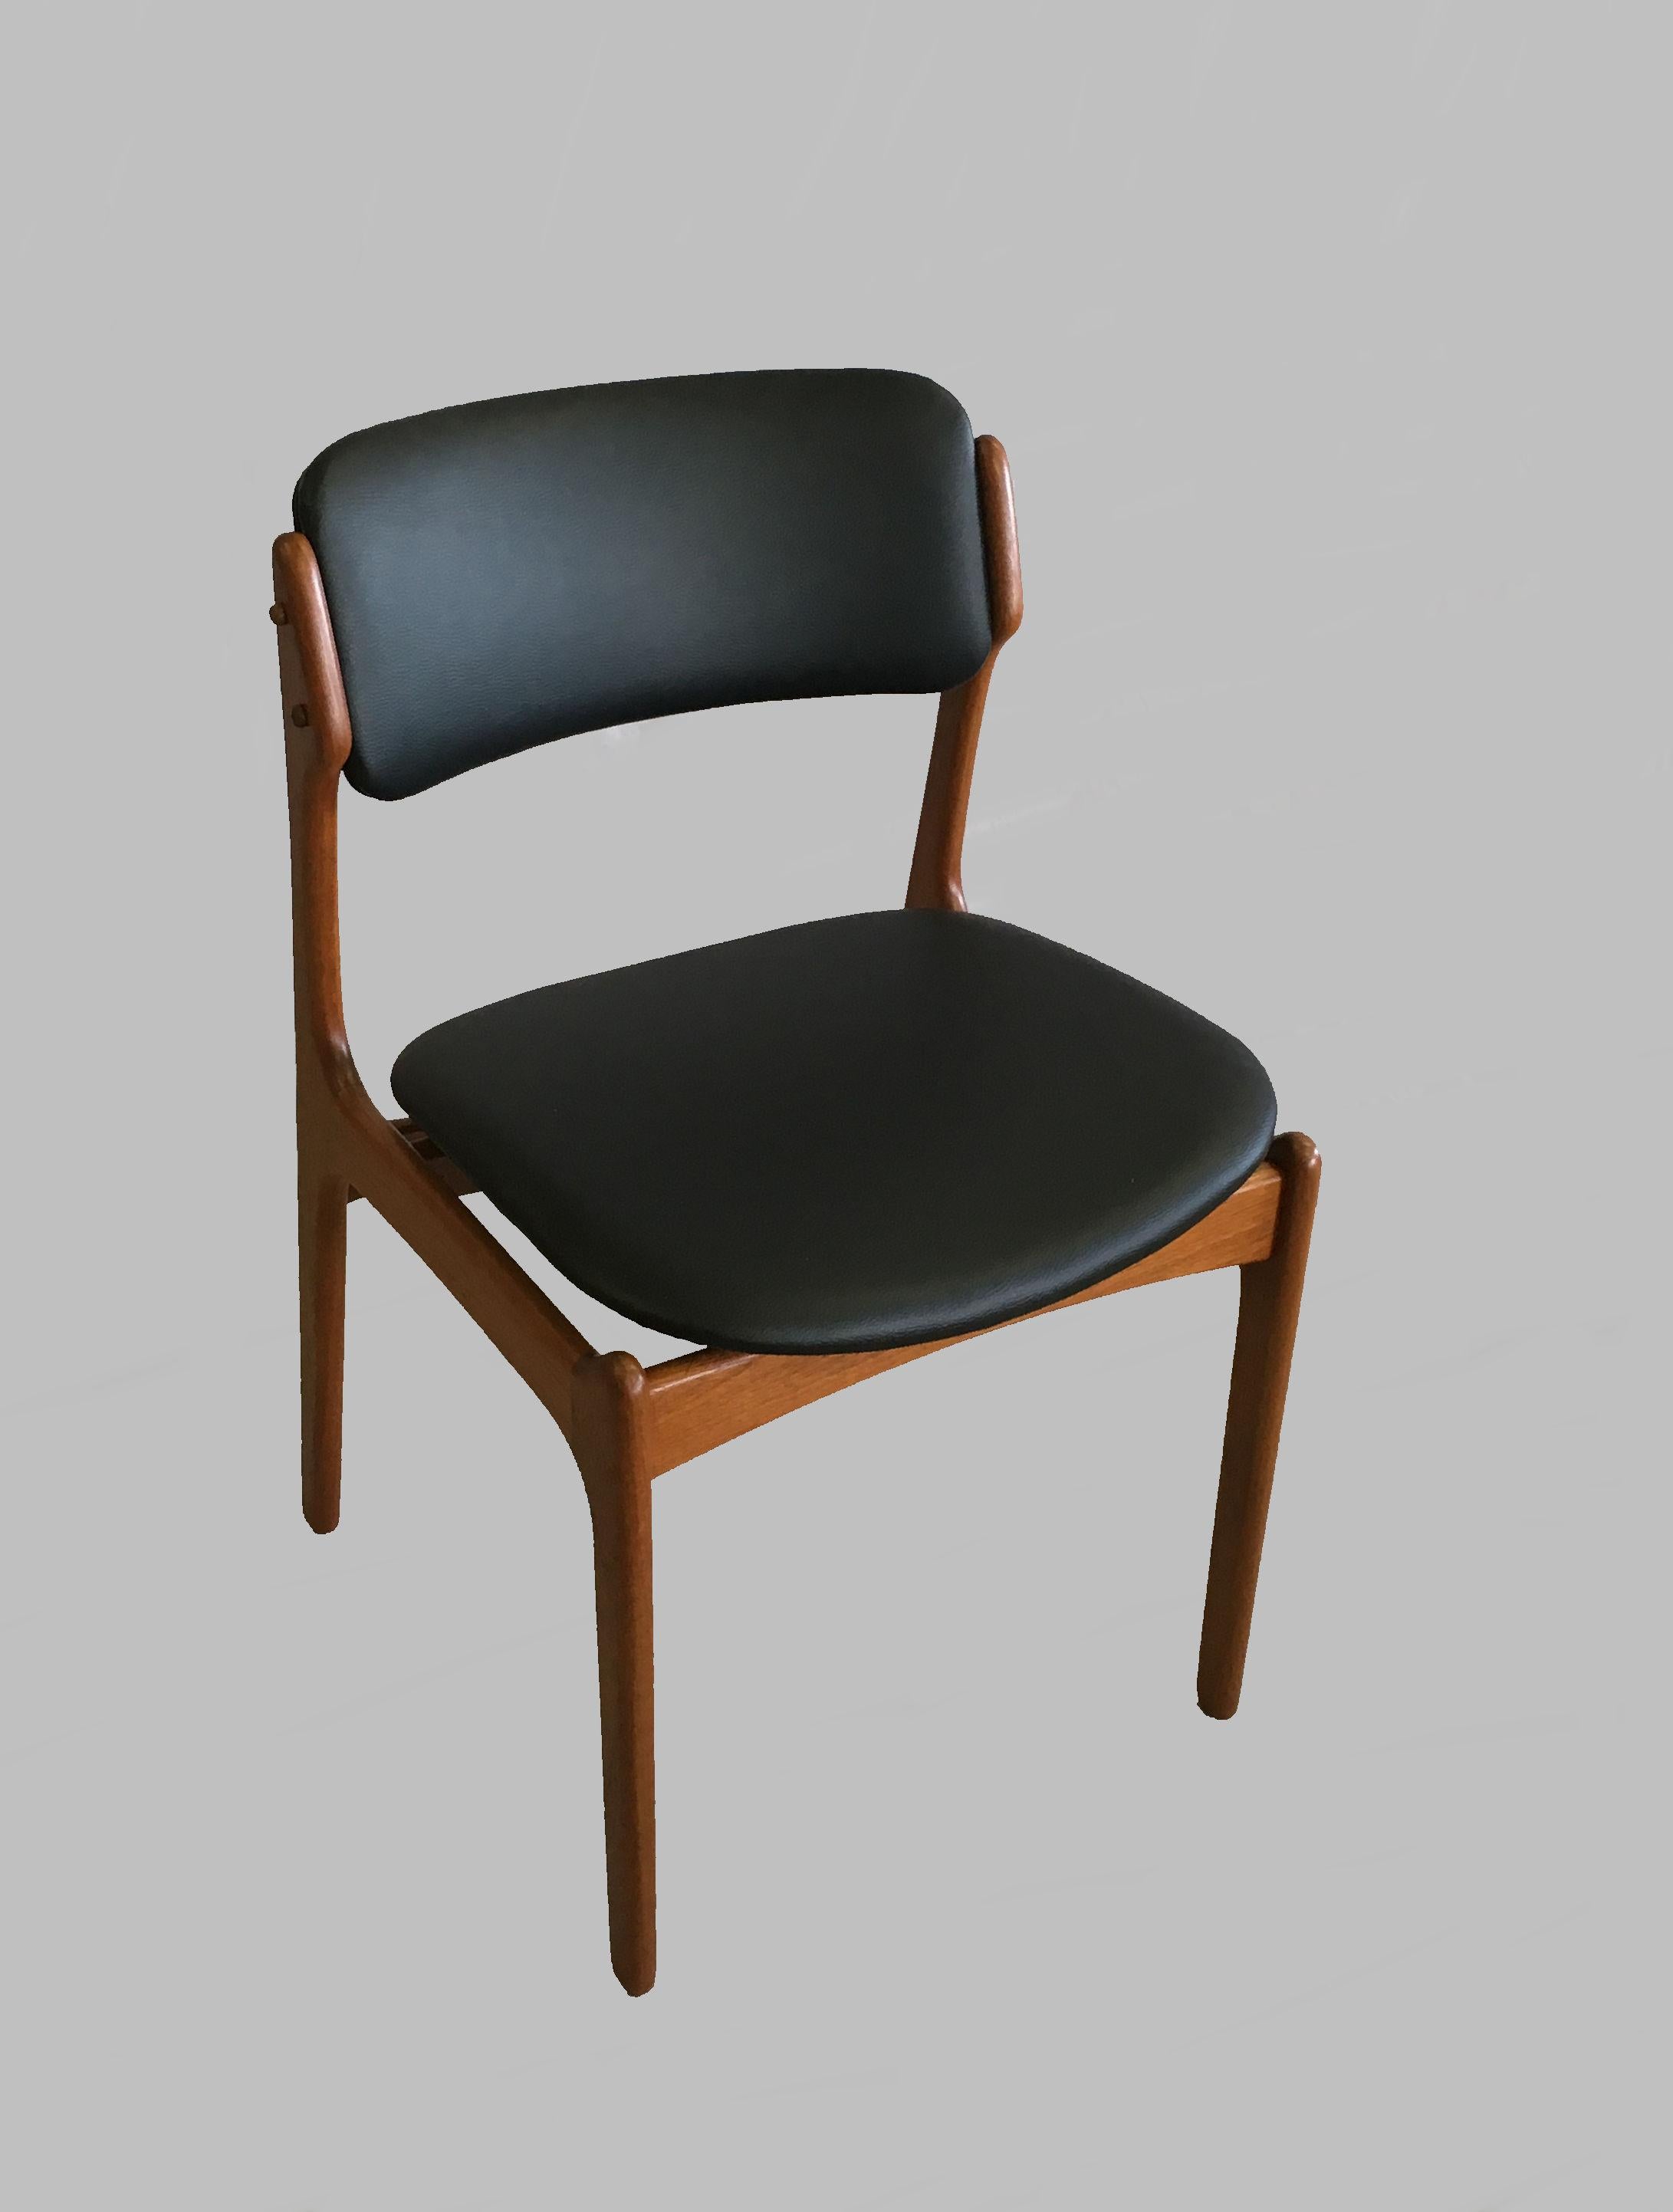 Four Fully Restored Erik Buch Teak Dining Chairs, Reupholstered in Black Leather For Sale 3